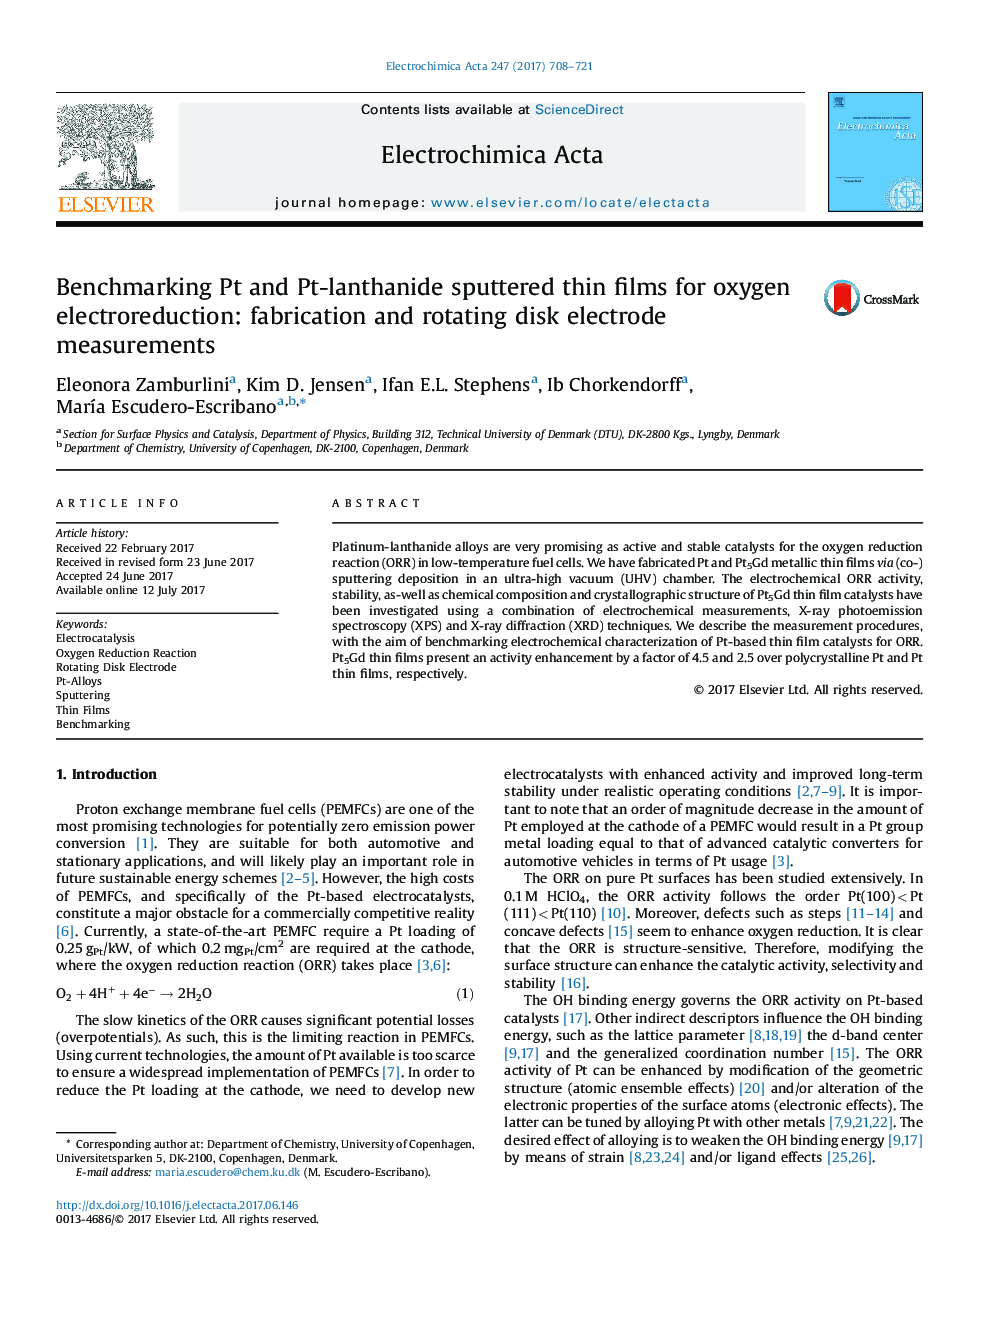 Benchmarking Pt and Pt-lanthanide sputtered thin films for oxygen electroreduction: fabrication and rotating disk electrode measurements